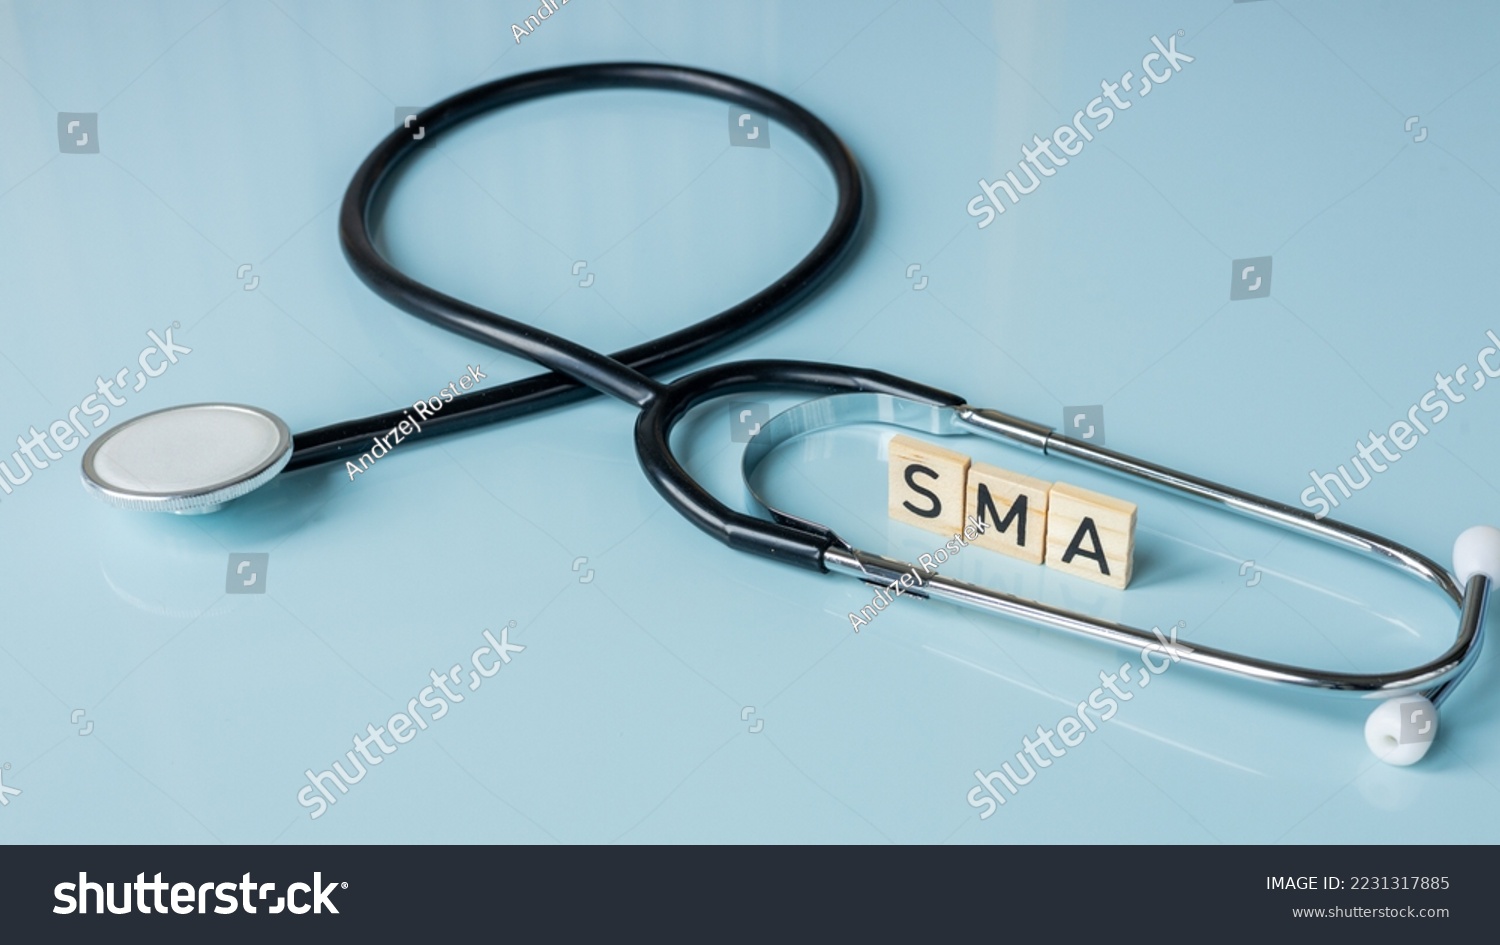 SMA, spinal muscular atrophy, Written on wooden blocks, a rare disease in which, due to a genetic defect, neurons in the spinal cord responsible for muscle contraction and relaxation gradually die #2231317885